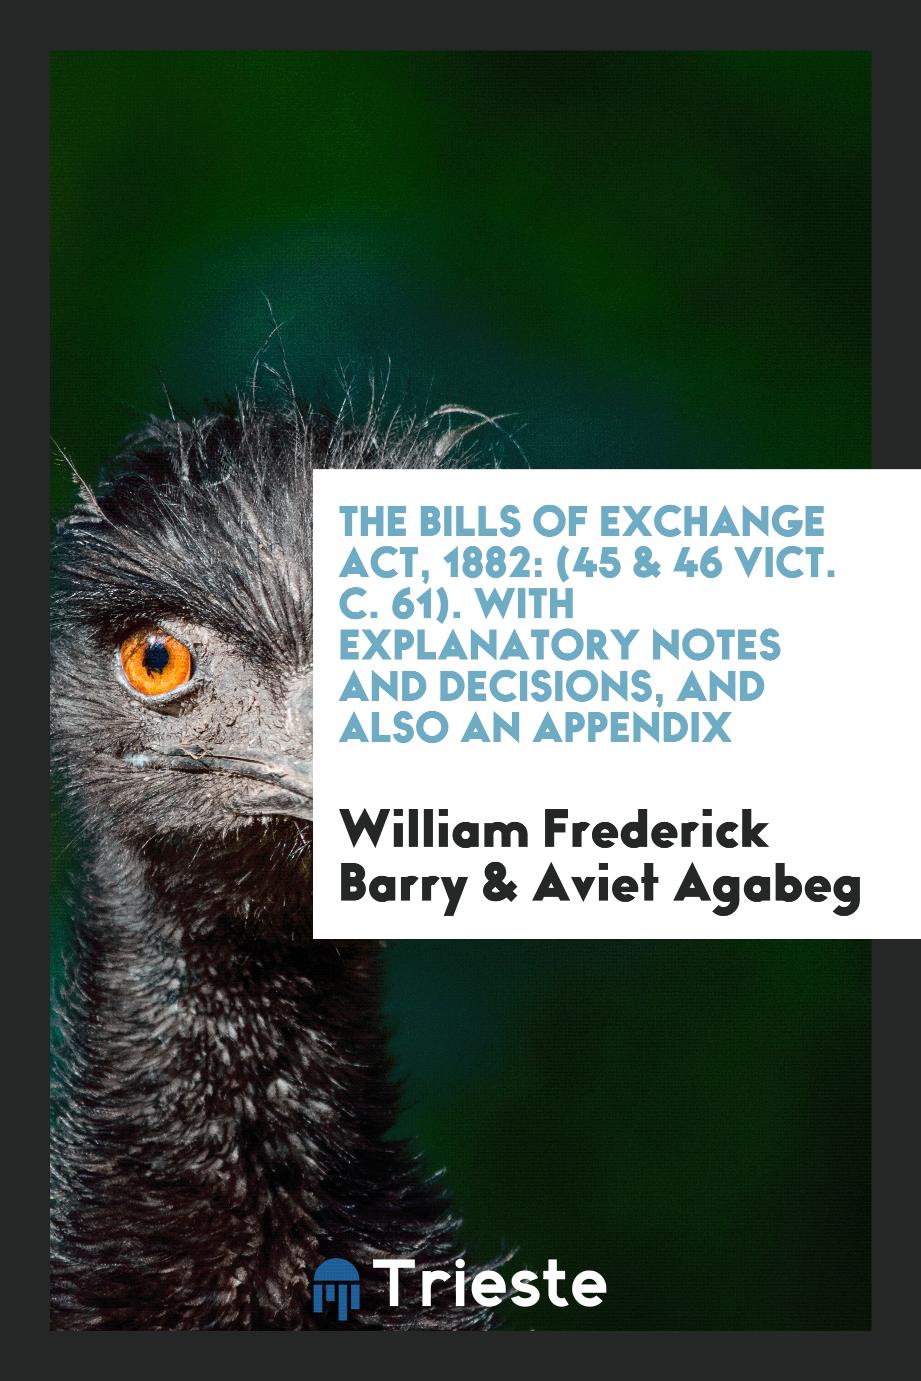 The Bills of Exchange Act, 1882: (45 & 46 Vict. C. 61). With Explanatory Notes and Decisions, and Also an Appendix